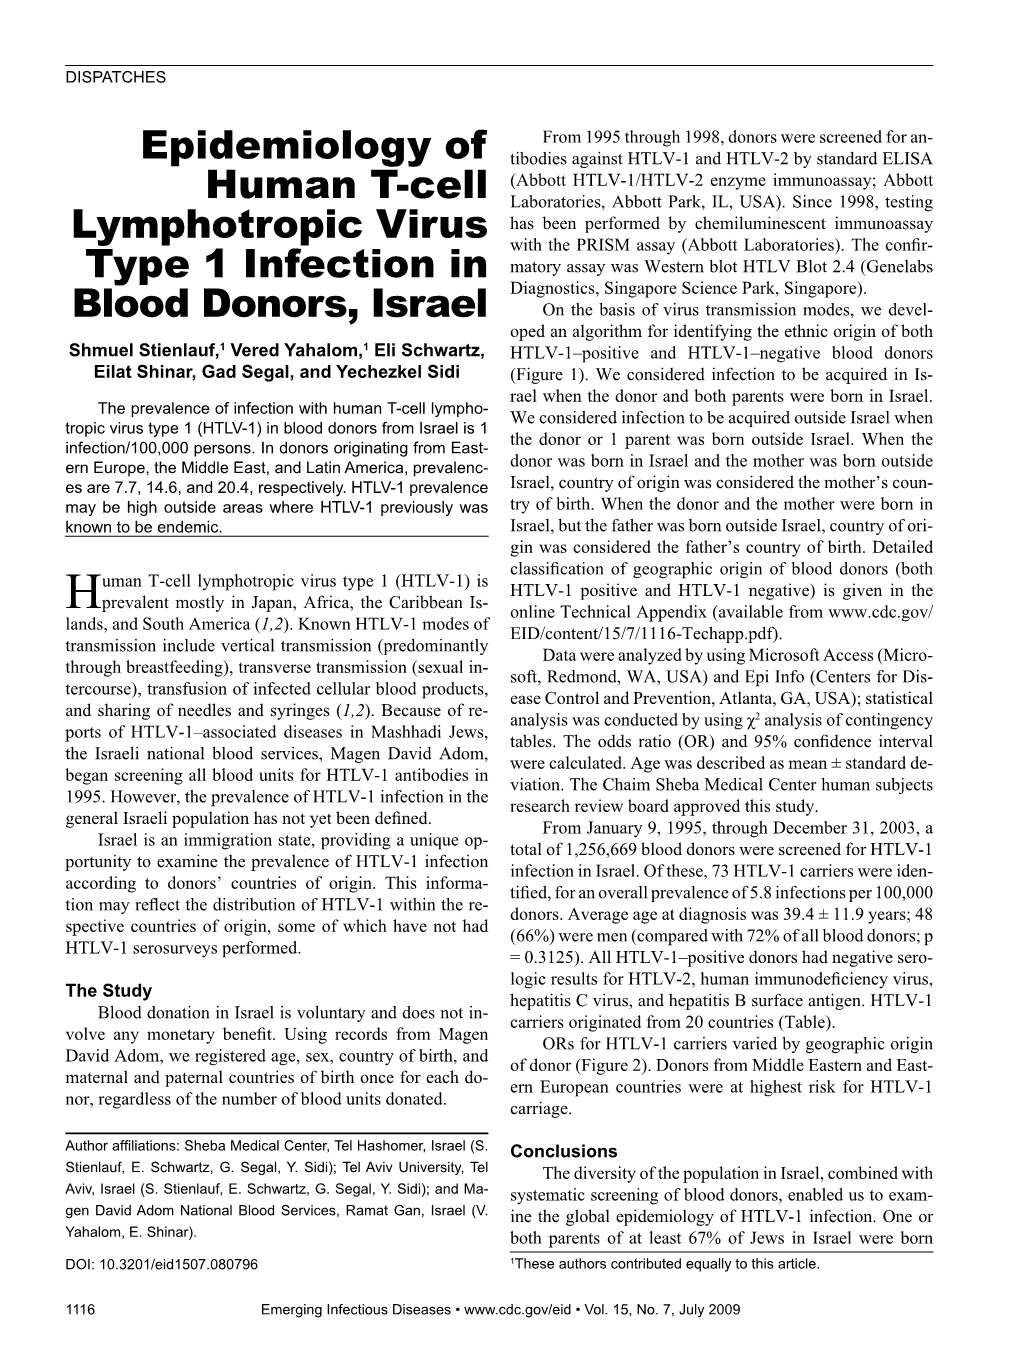 Epidemiology of Human T-Cell Lymphotropic Virus Type 1 Infection in Blood Donors, Israel